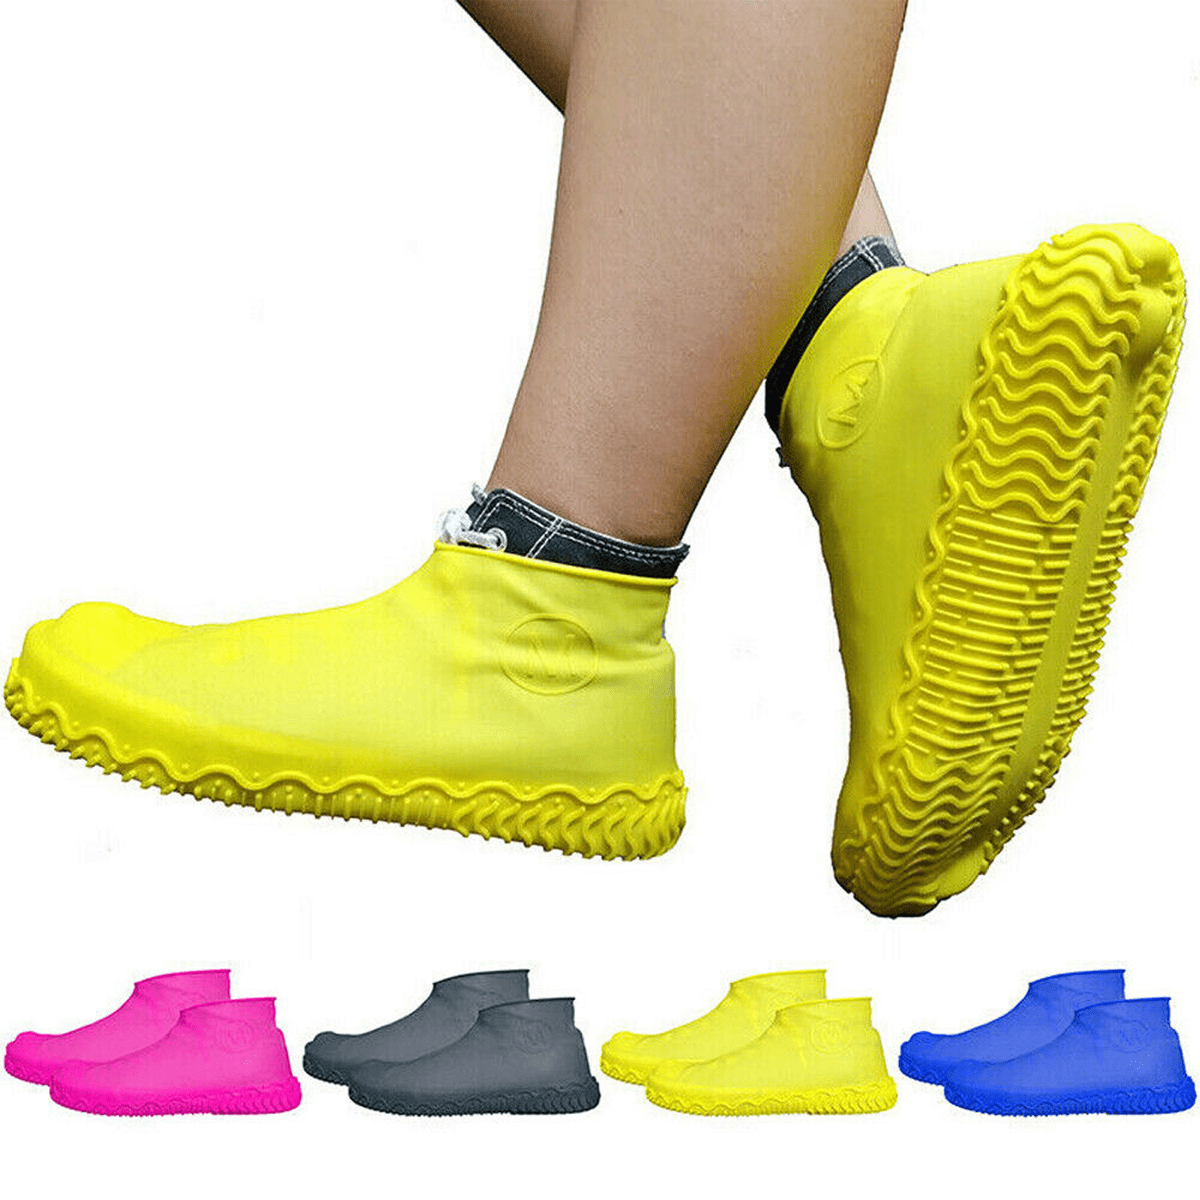 1 Pair Reusable Shoes Covers Waterproof Slip-resistant Rubber Rain Boots Covers 